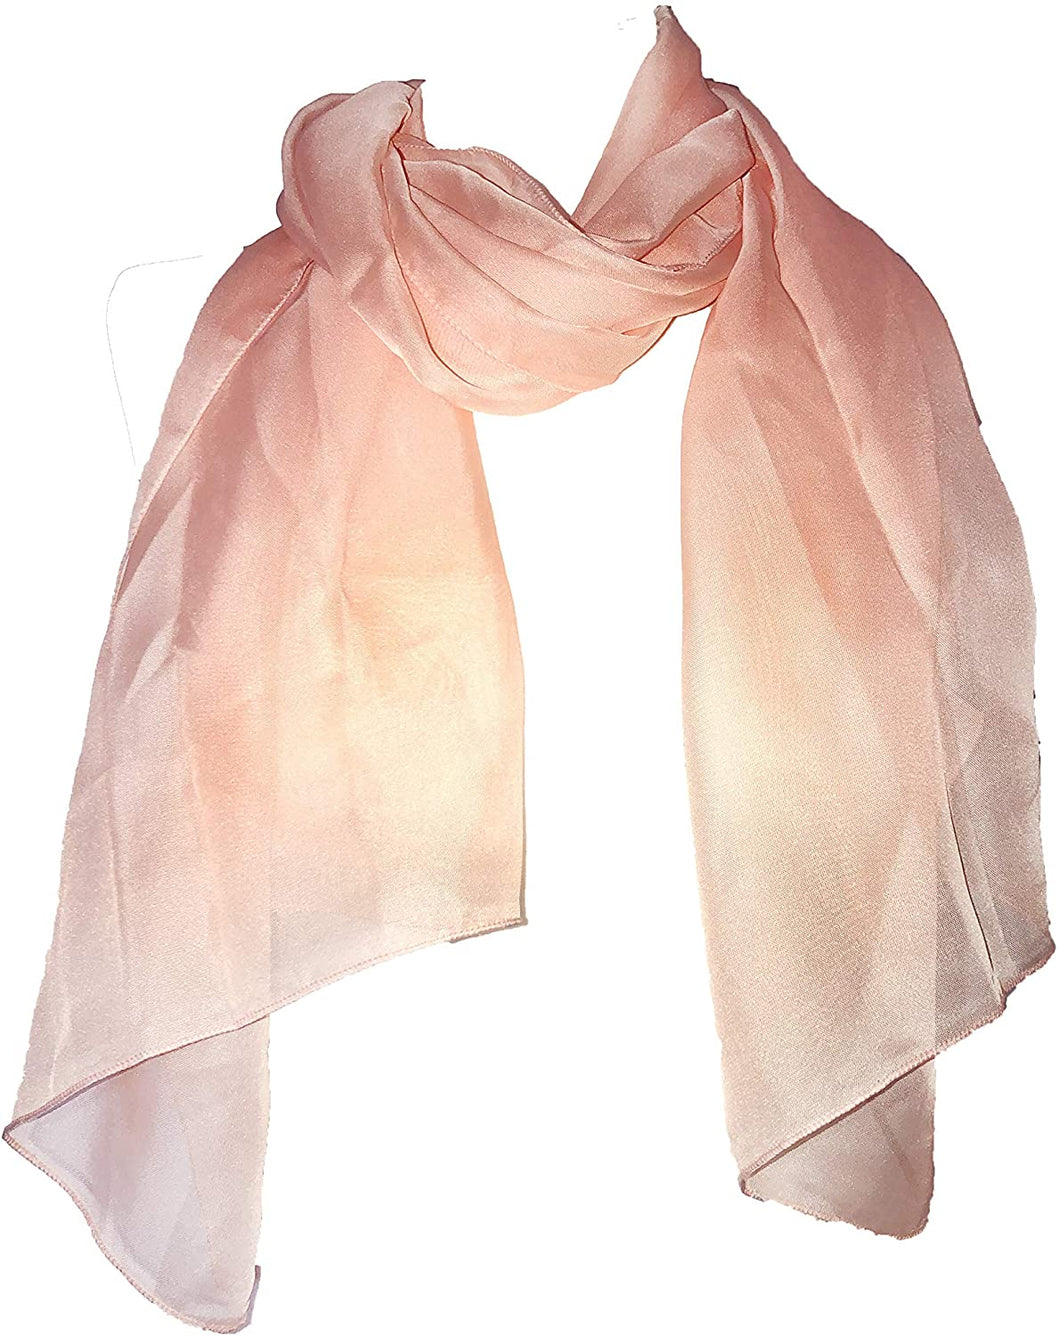 Plain Peach Chiffon Style Scarf Thin Pretty Scarf Great for Any Outfit Lovely Gift